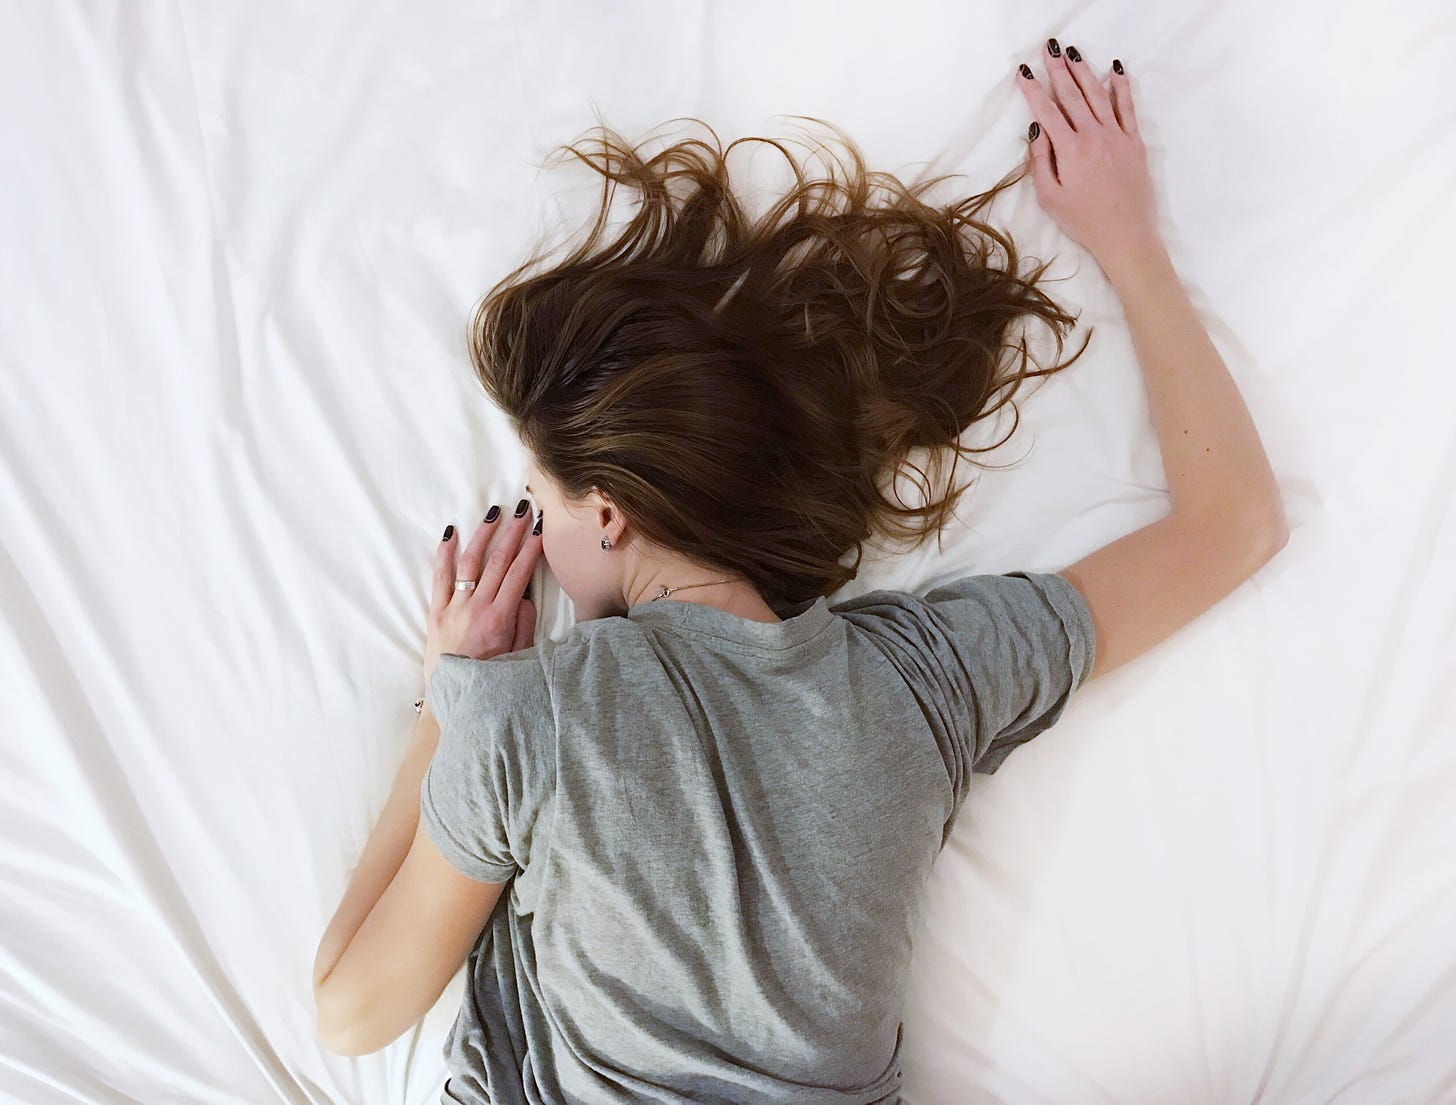 Exhausted woman face down on bed with white sheets